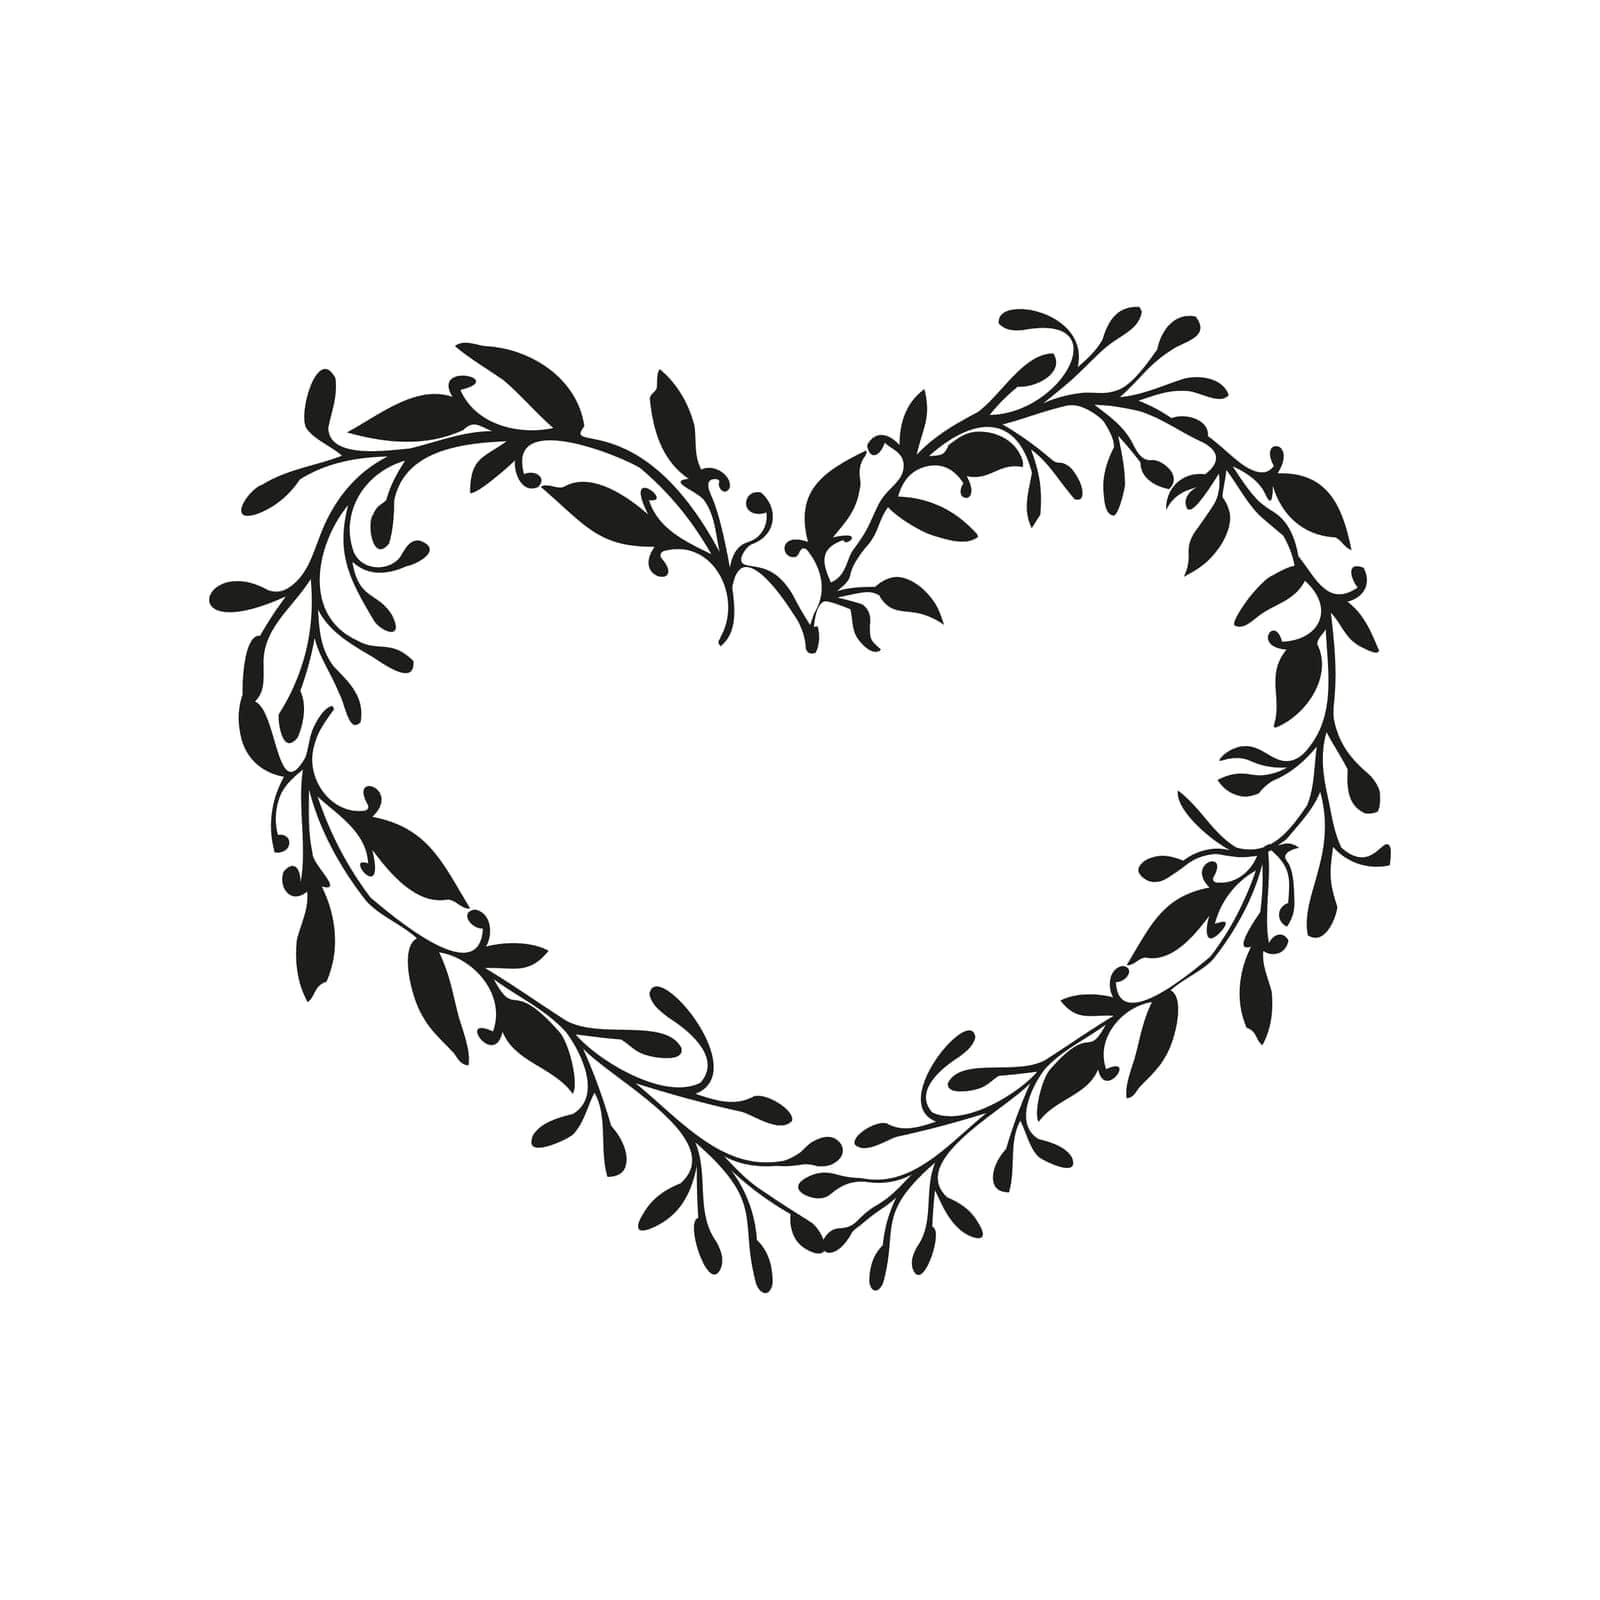 Floral heart frame with greenery by MintanArt